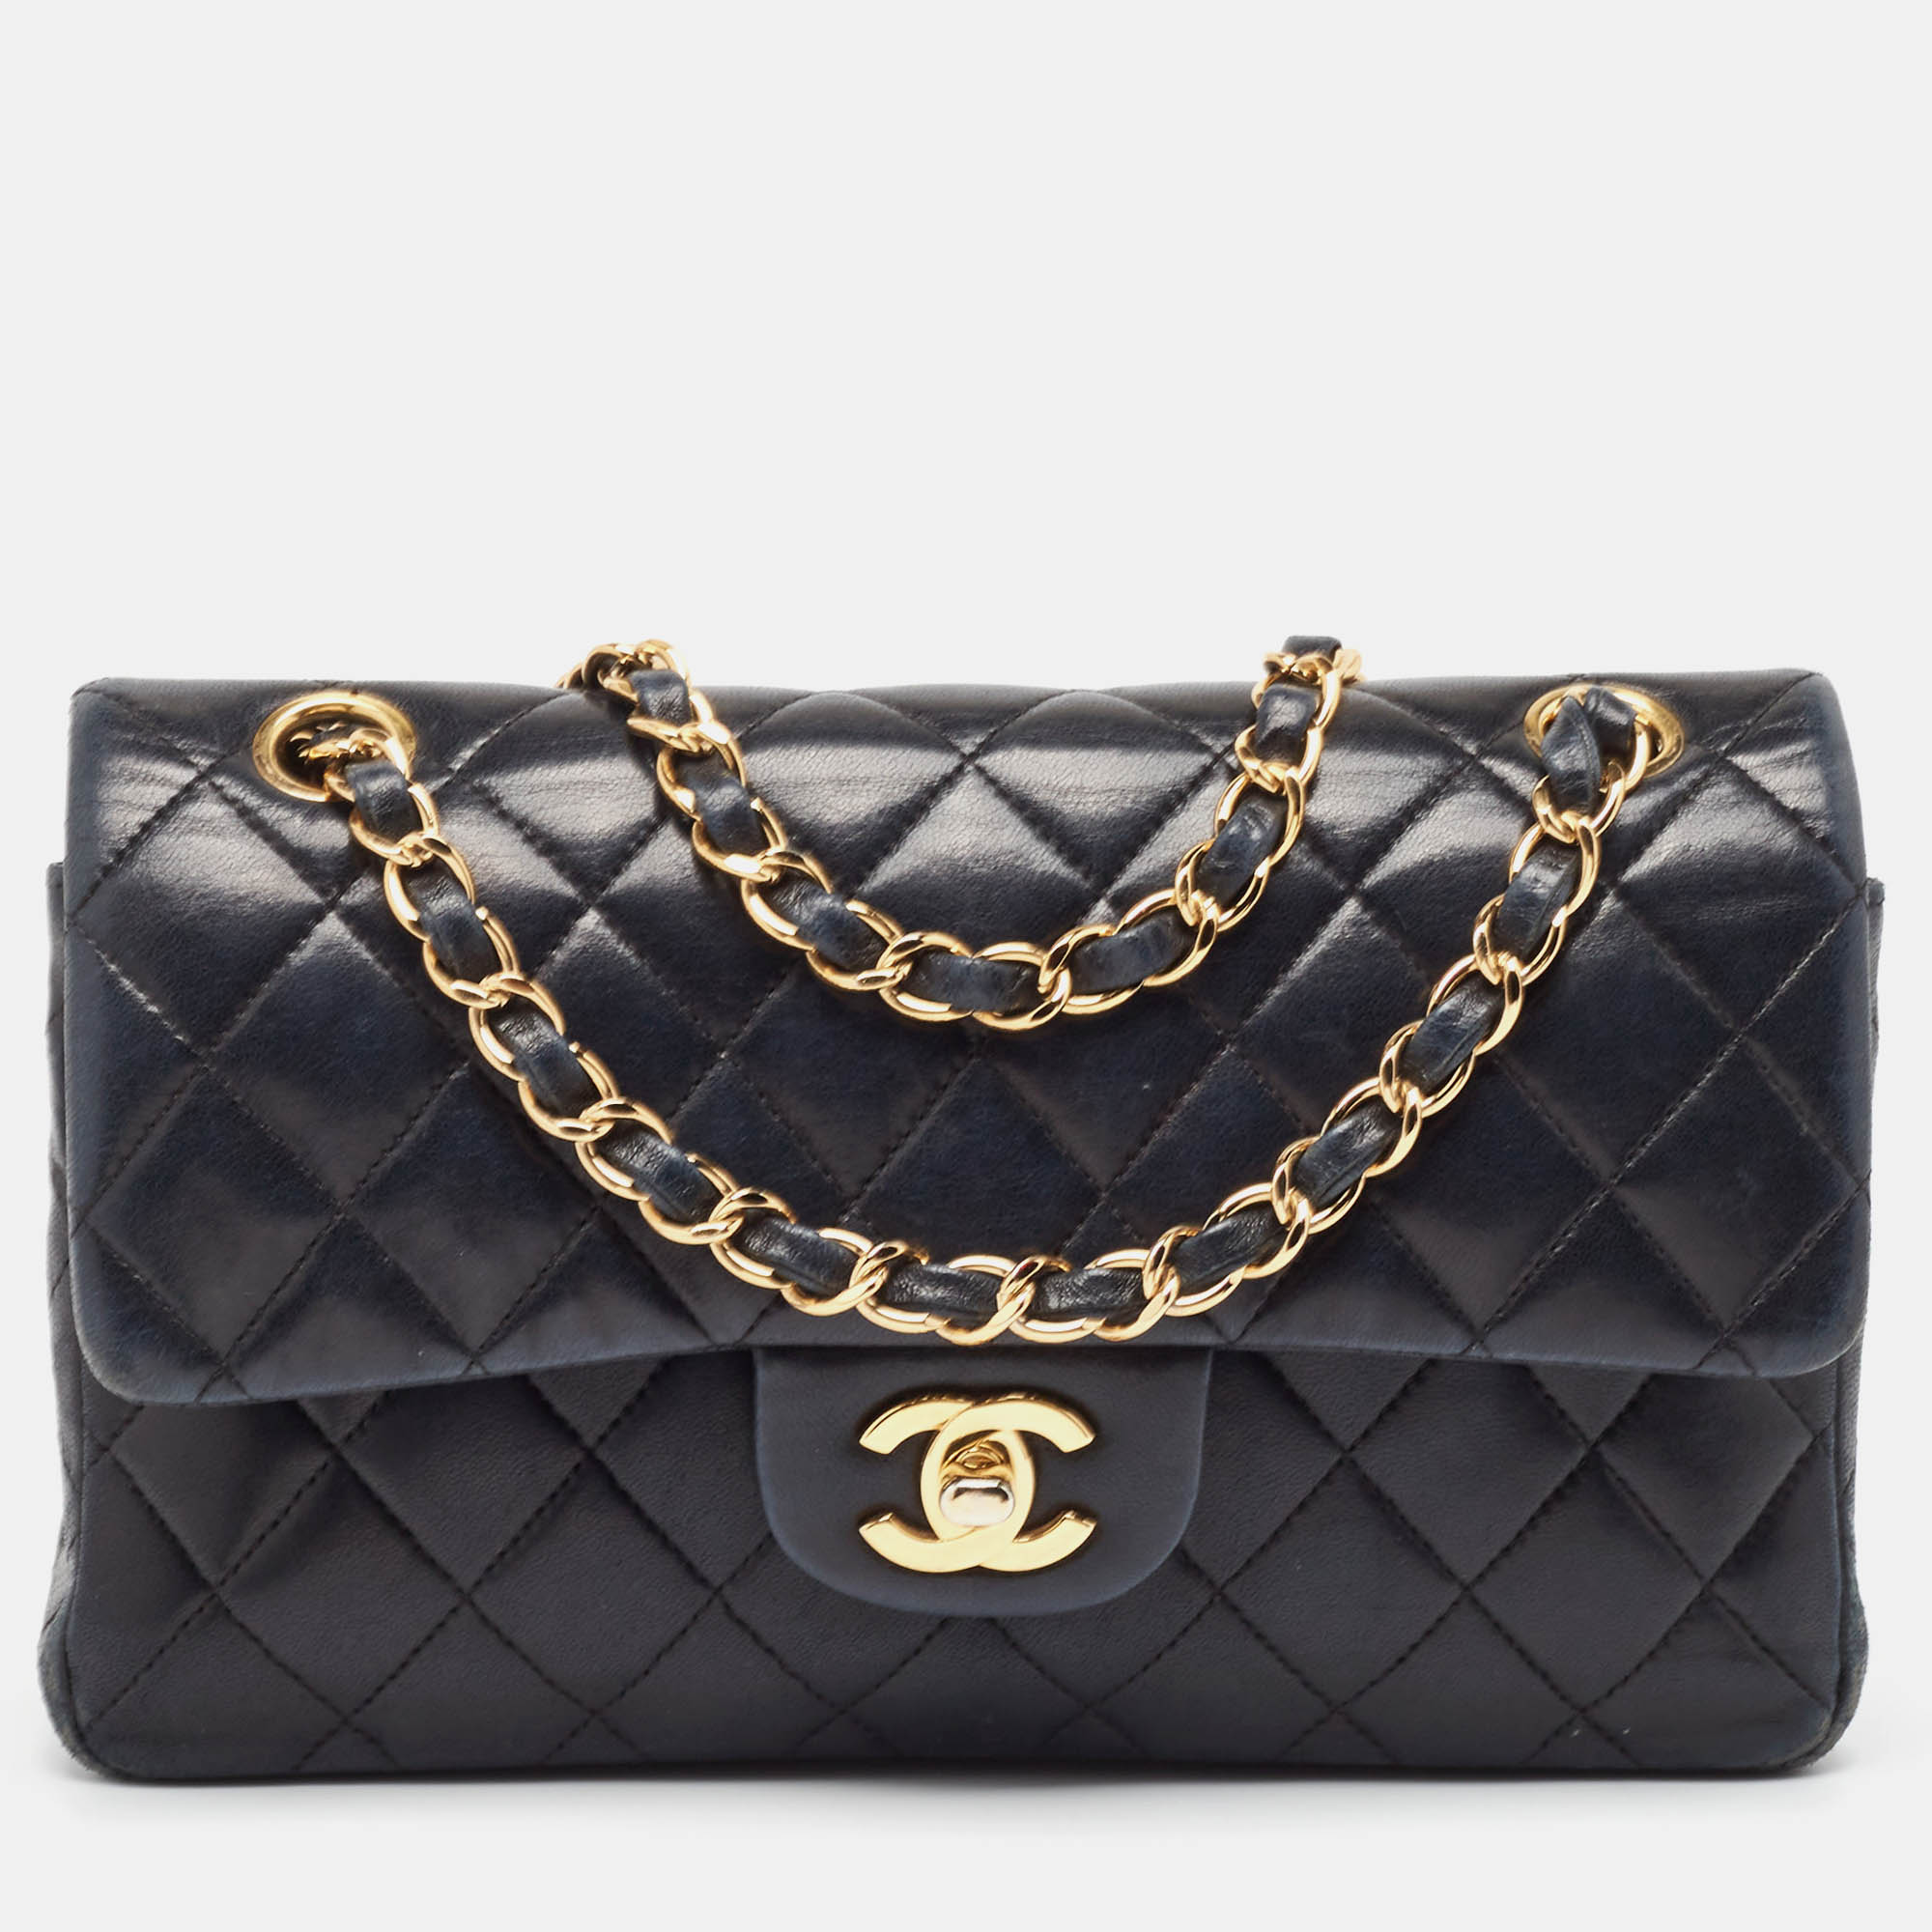 Chanel black quilted leather small classic double flap bag